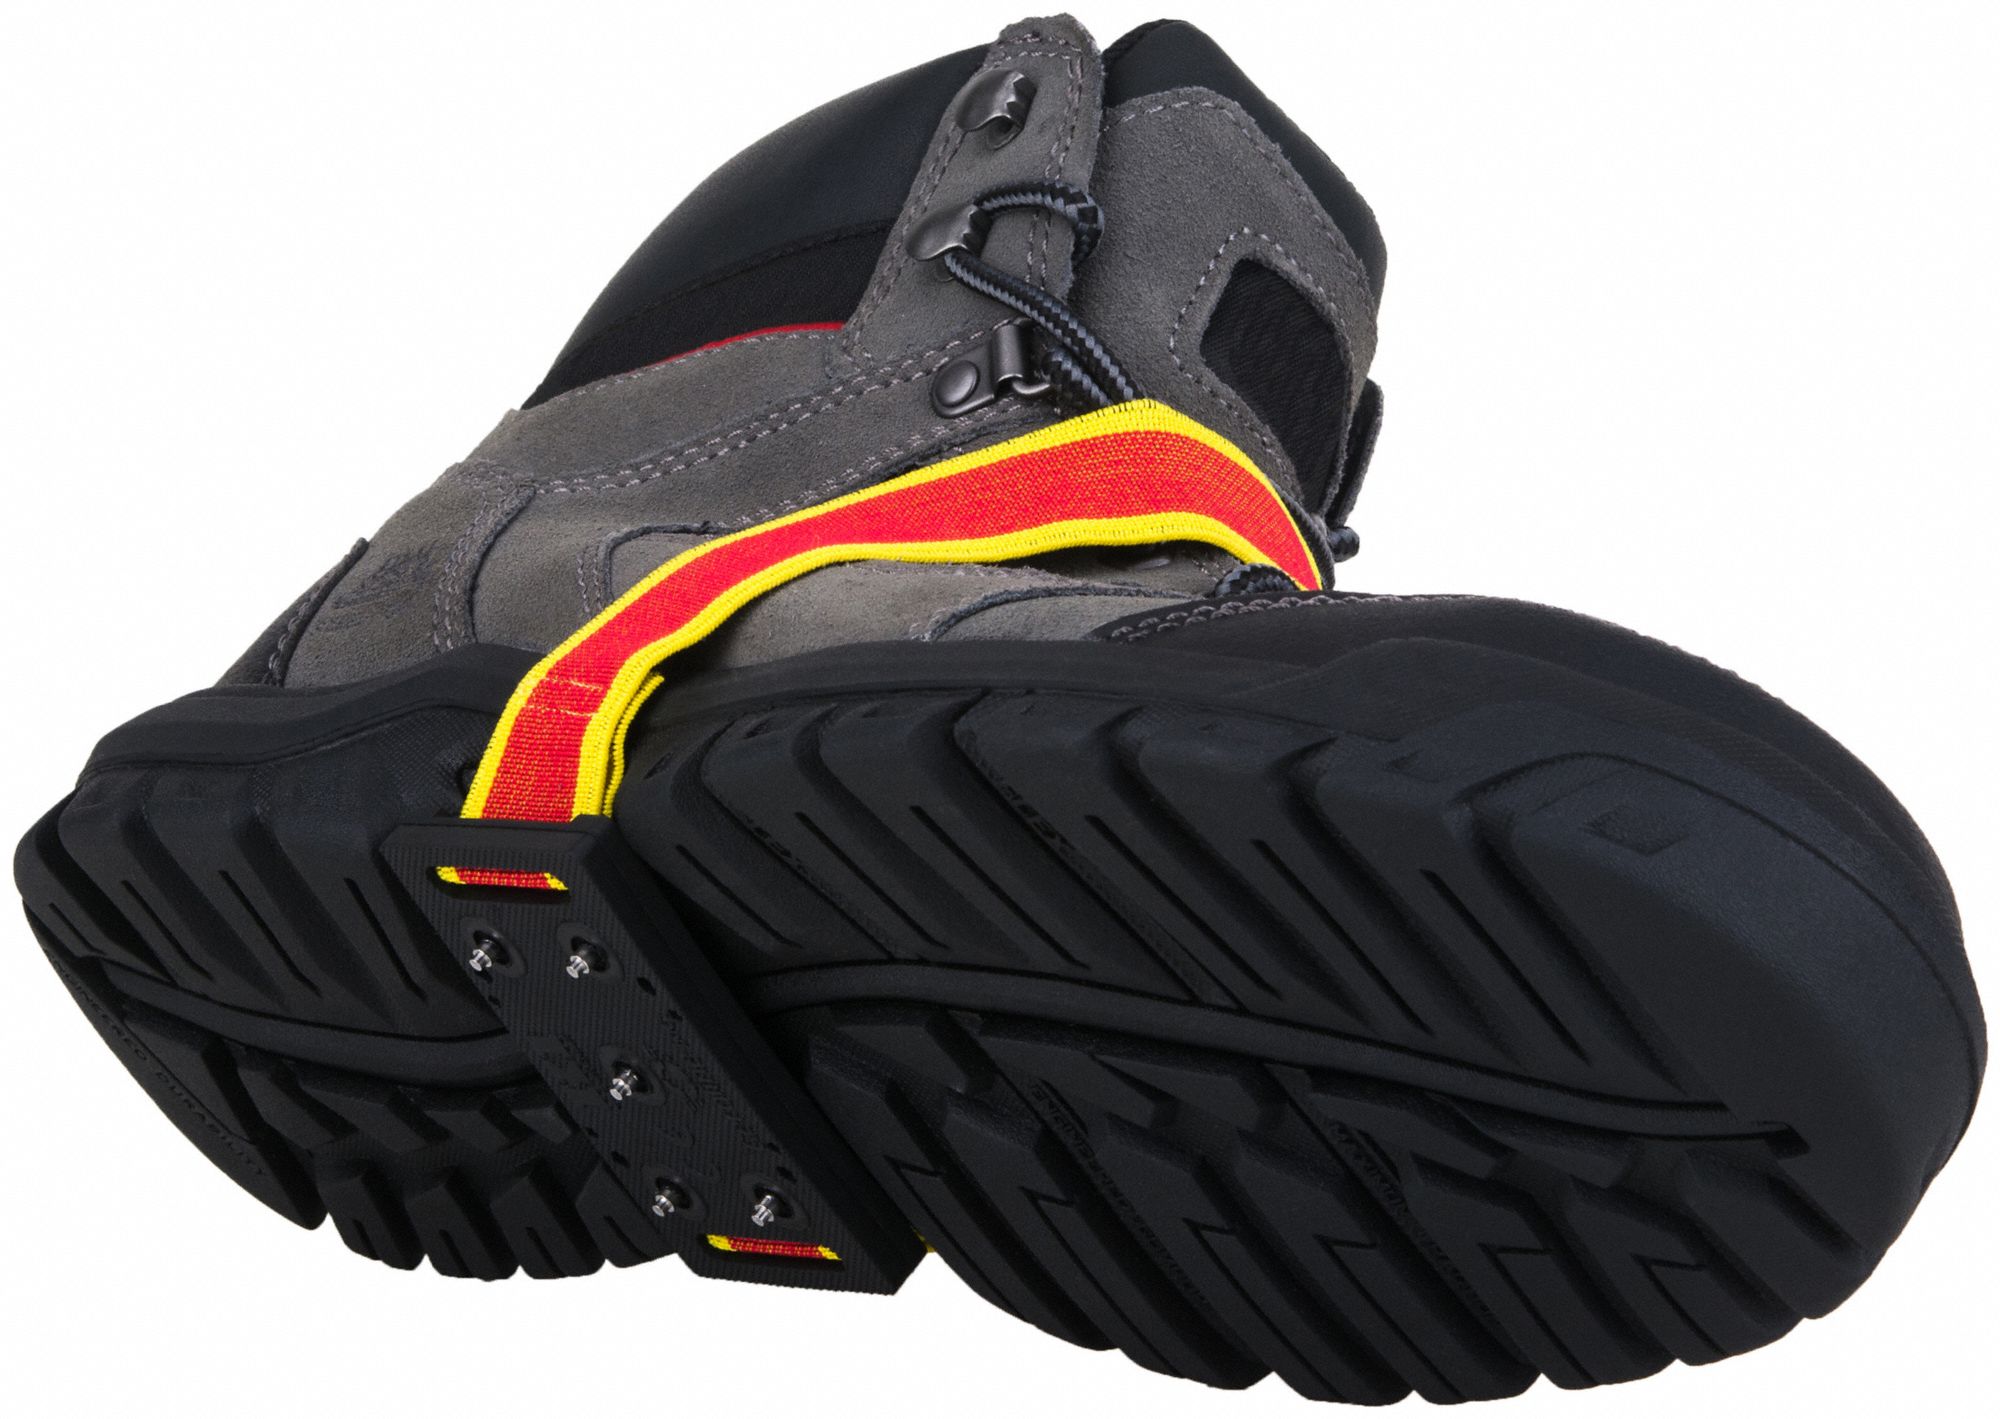 Traction Device: Mid-Sole Footwear Coverage, Rubber, Stud, 3 in L x 1-3/4 in W x 1/2 in H, 1 PR